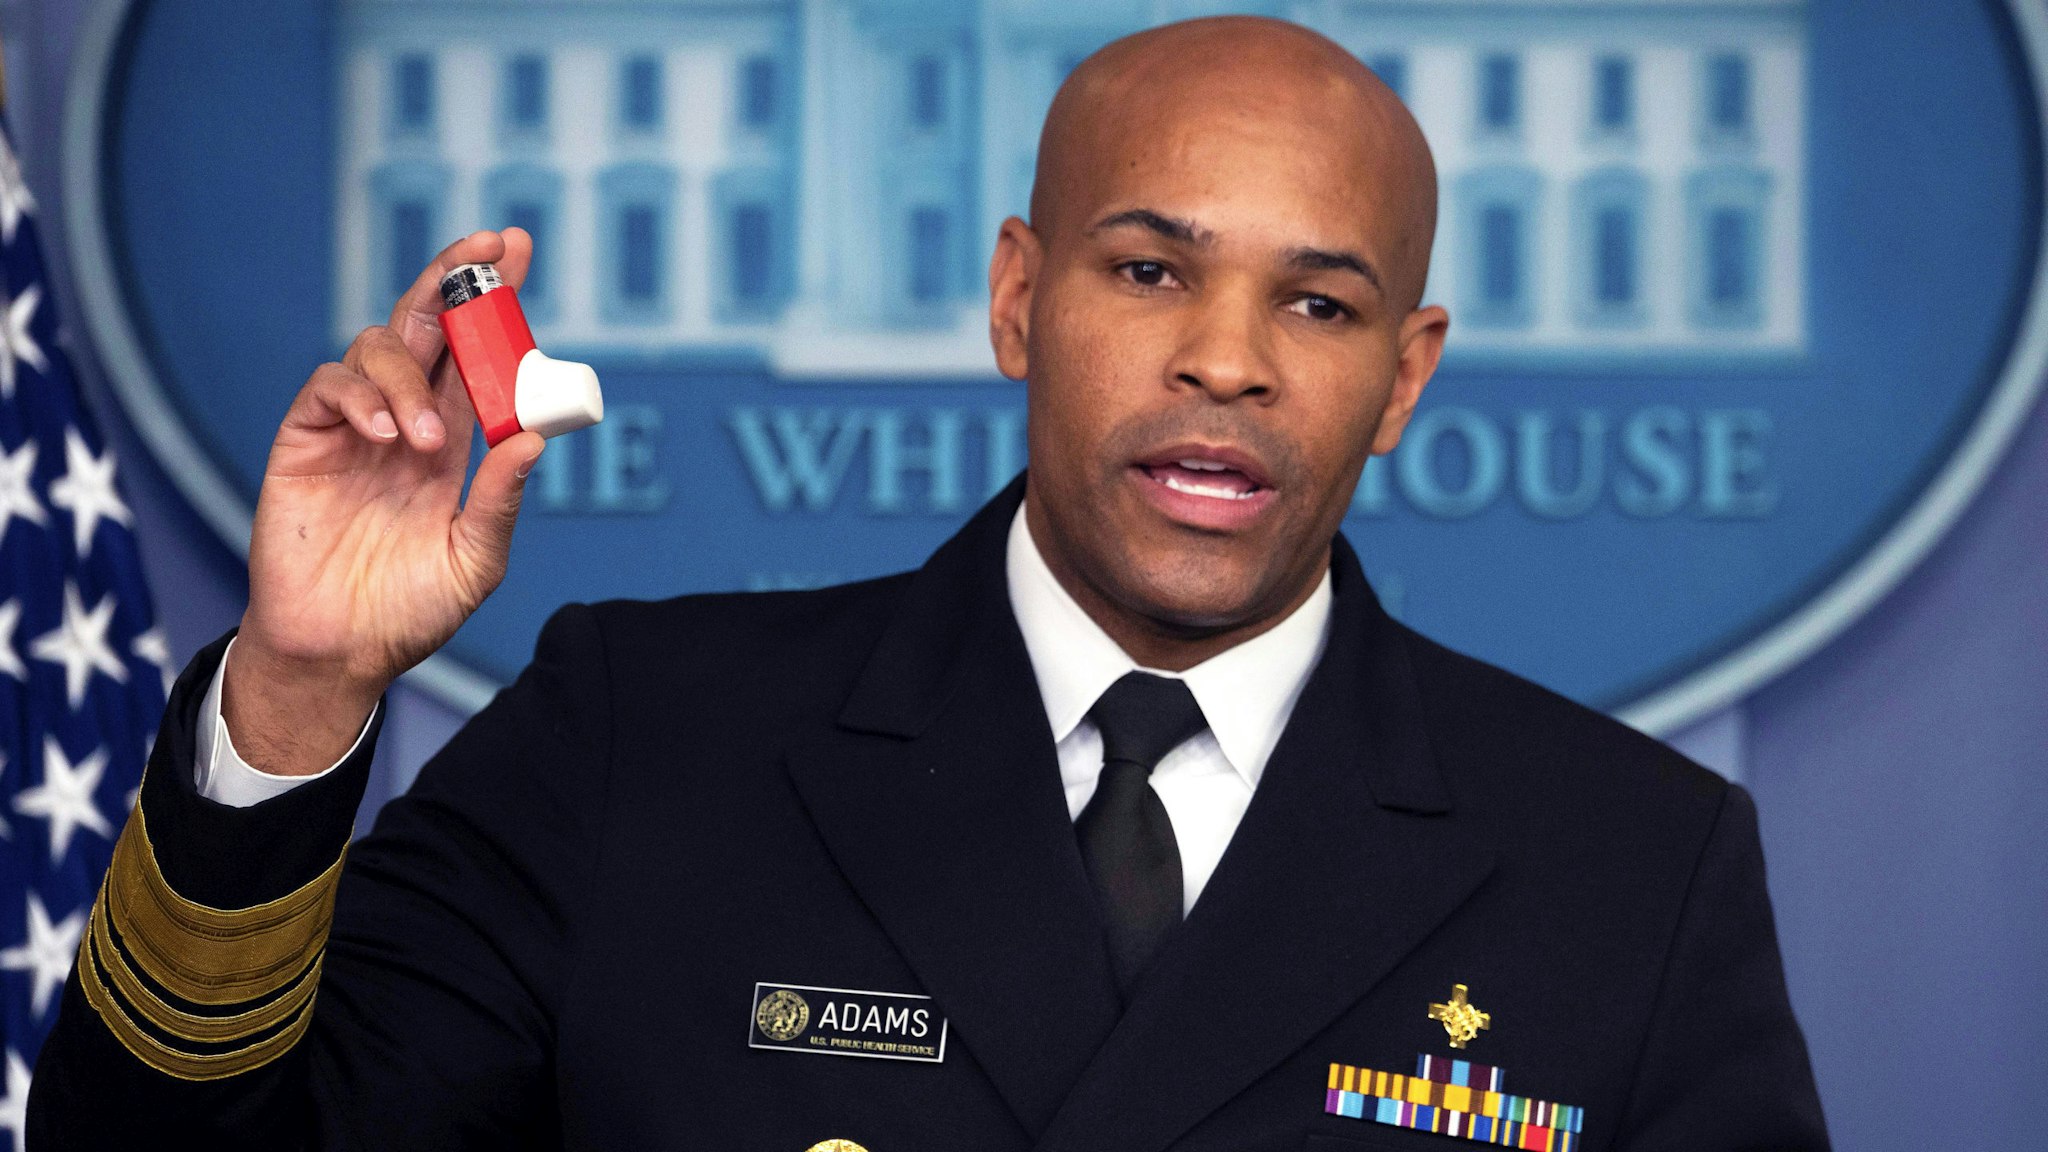 US Surgeon General Jerome Adams shows his inhaler as speaks during the daily briefing on the novel coronavirus, which causes COVID-19, in the Brady Briefing Room at the White House on April 10, 2020, in Washington, DC.